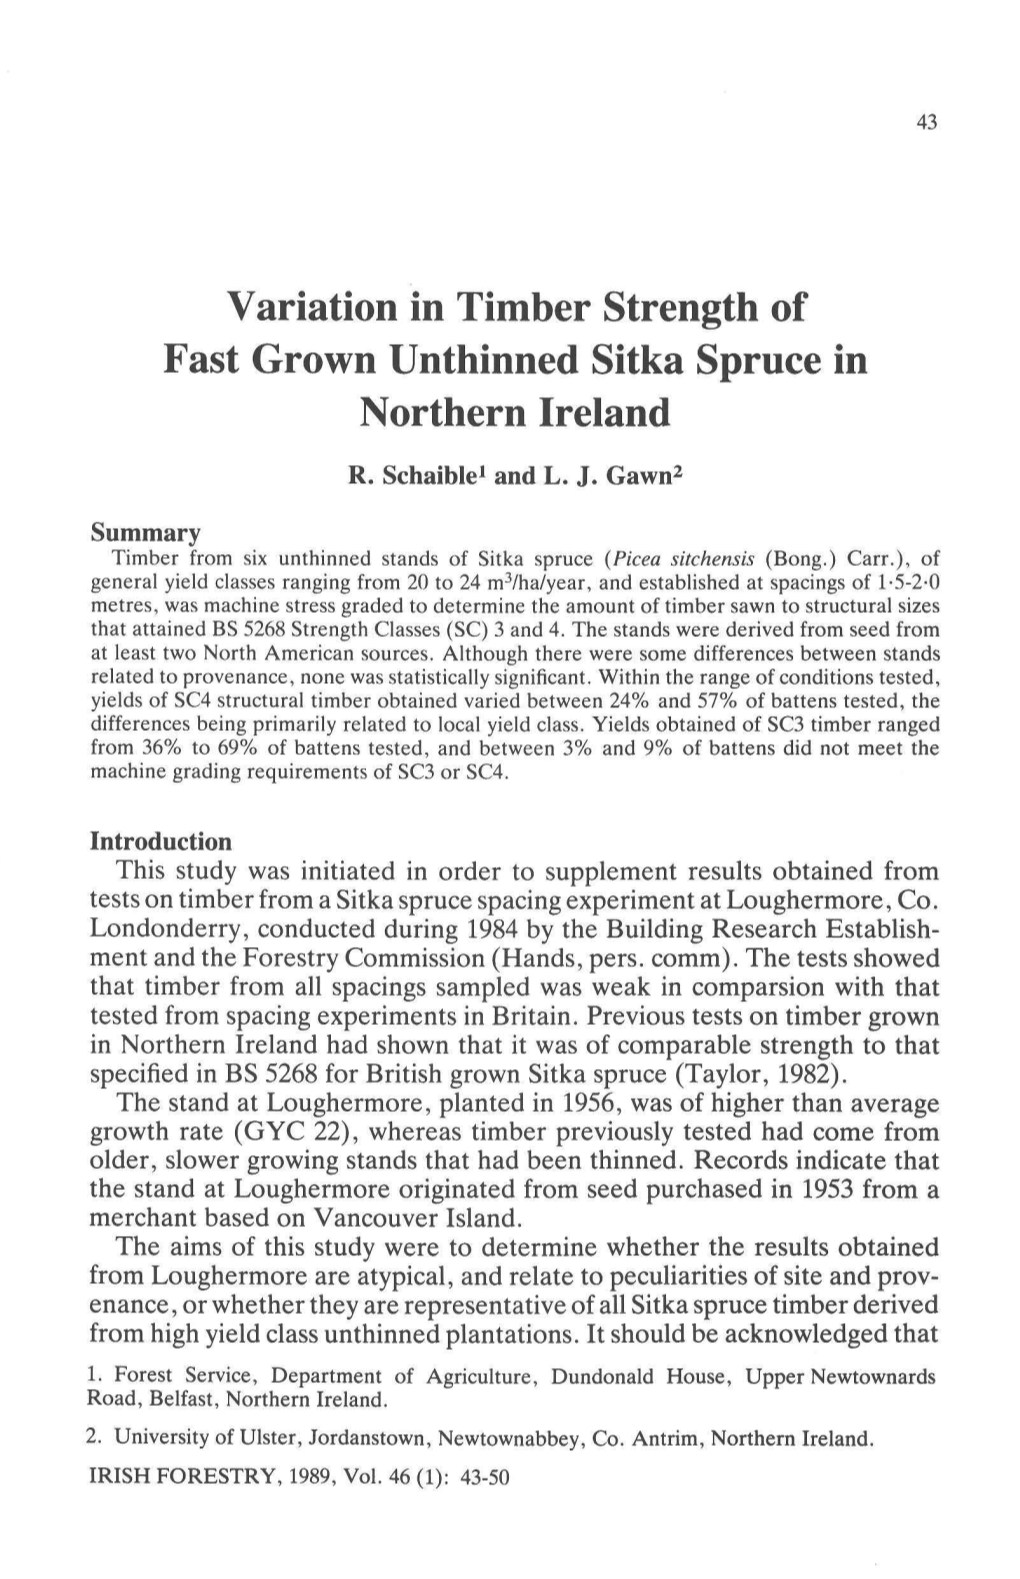 Variation in Timber Strength of Fast Grown Unthinned Sitka Spruce in Northern Ireland